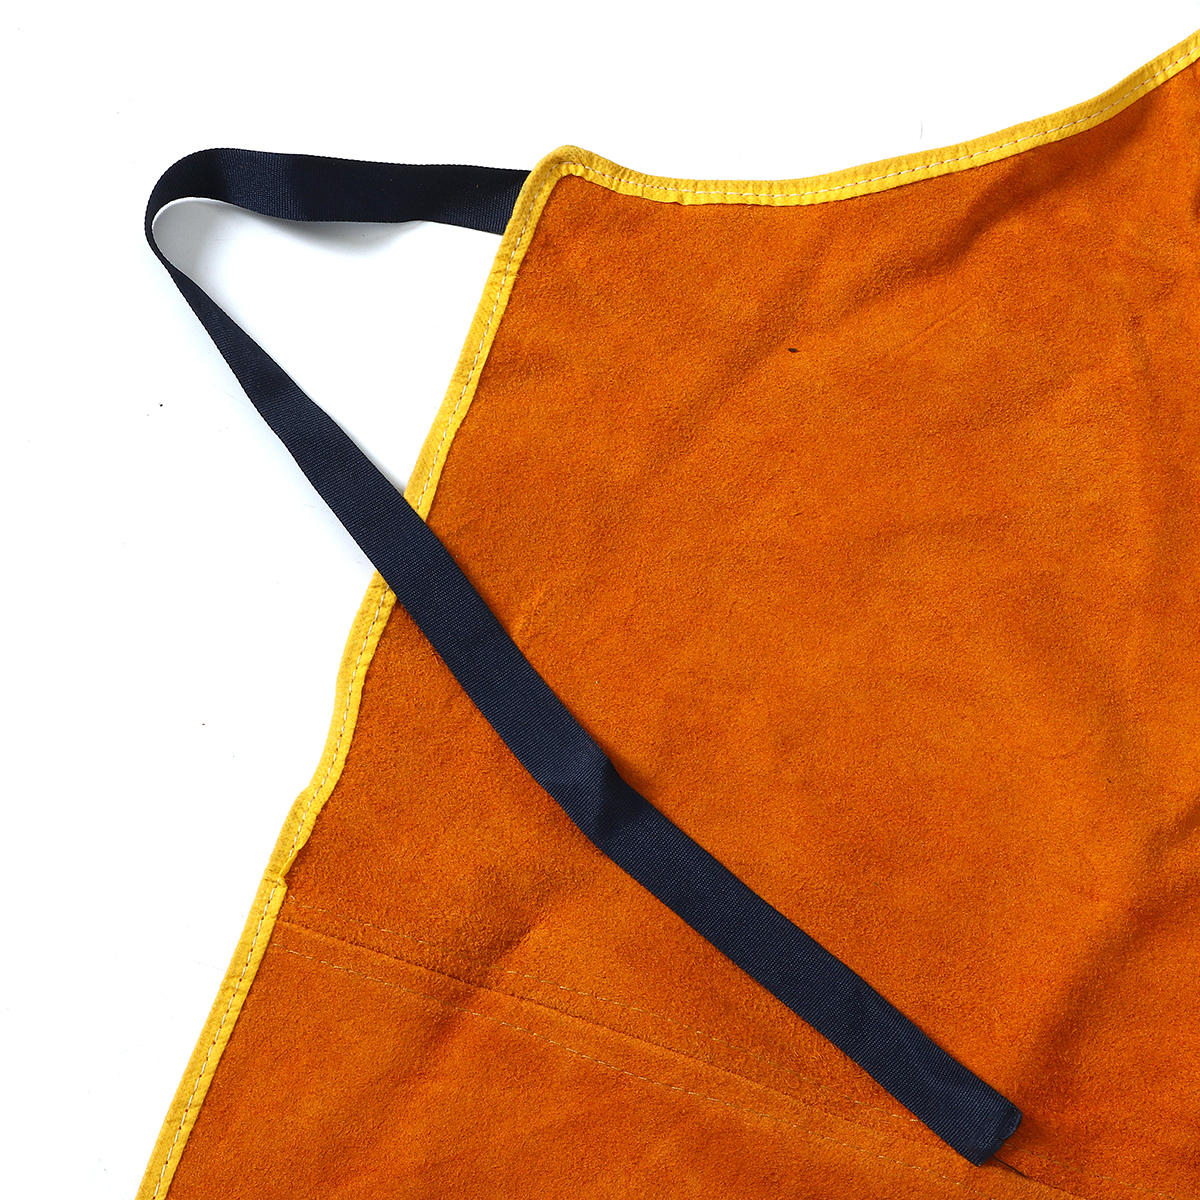 Cowhide-Leather-Welding-Apron-Welder-Protection-Clothe-Mechanic-Protector-Gear-1642713-5